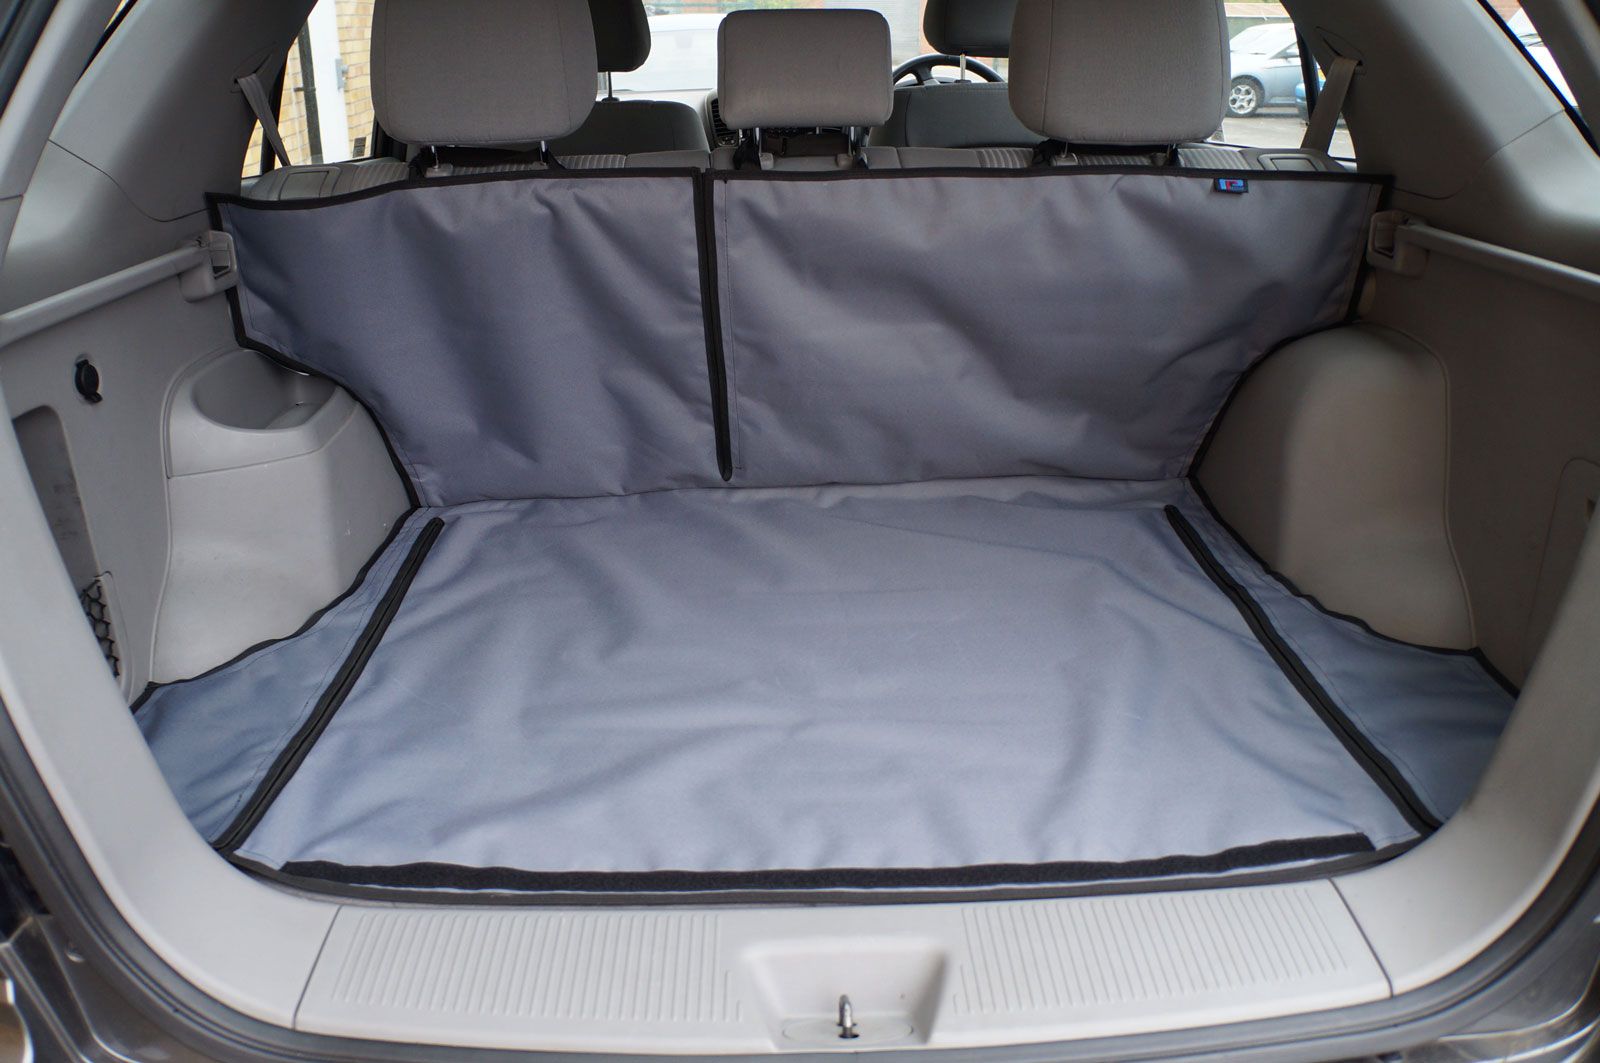 Ford Focus Hatchback 2005 - 2011 Fully Tailored Load Liner without bumper flap - Example